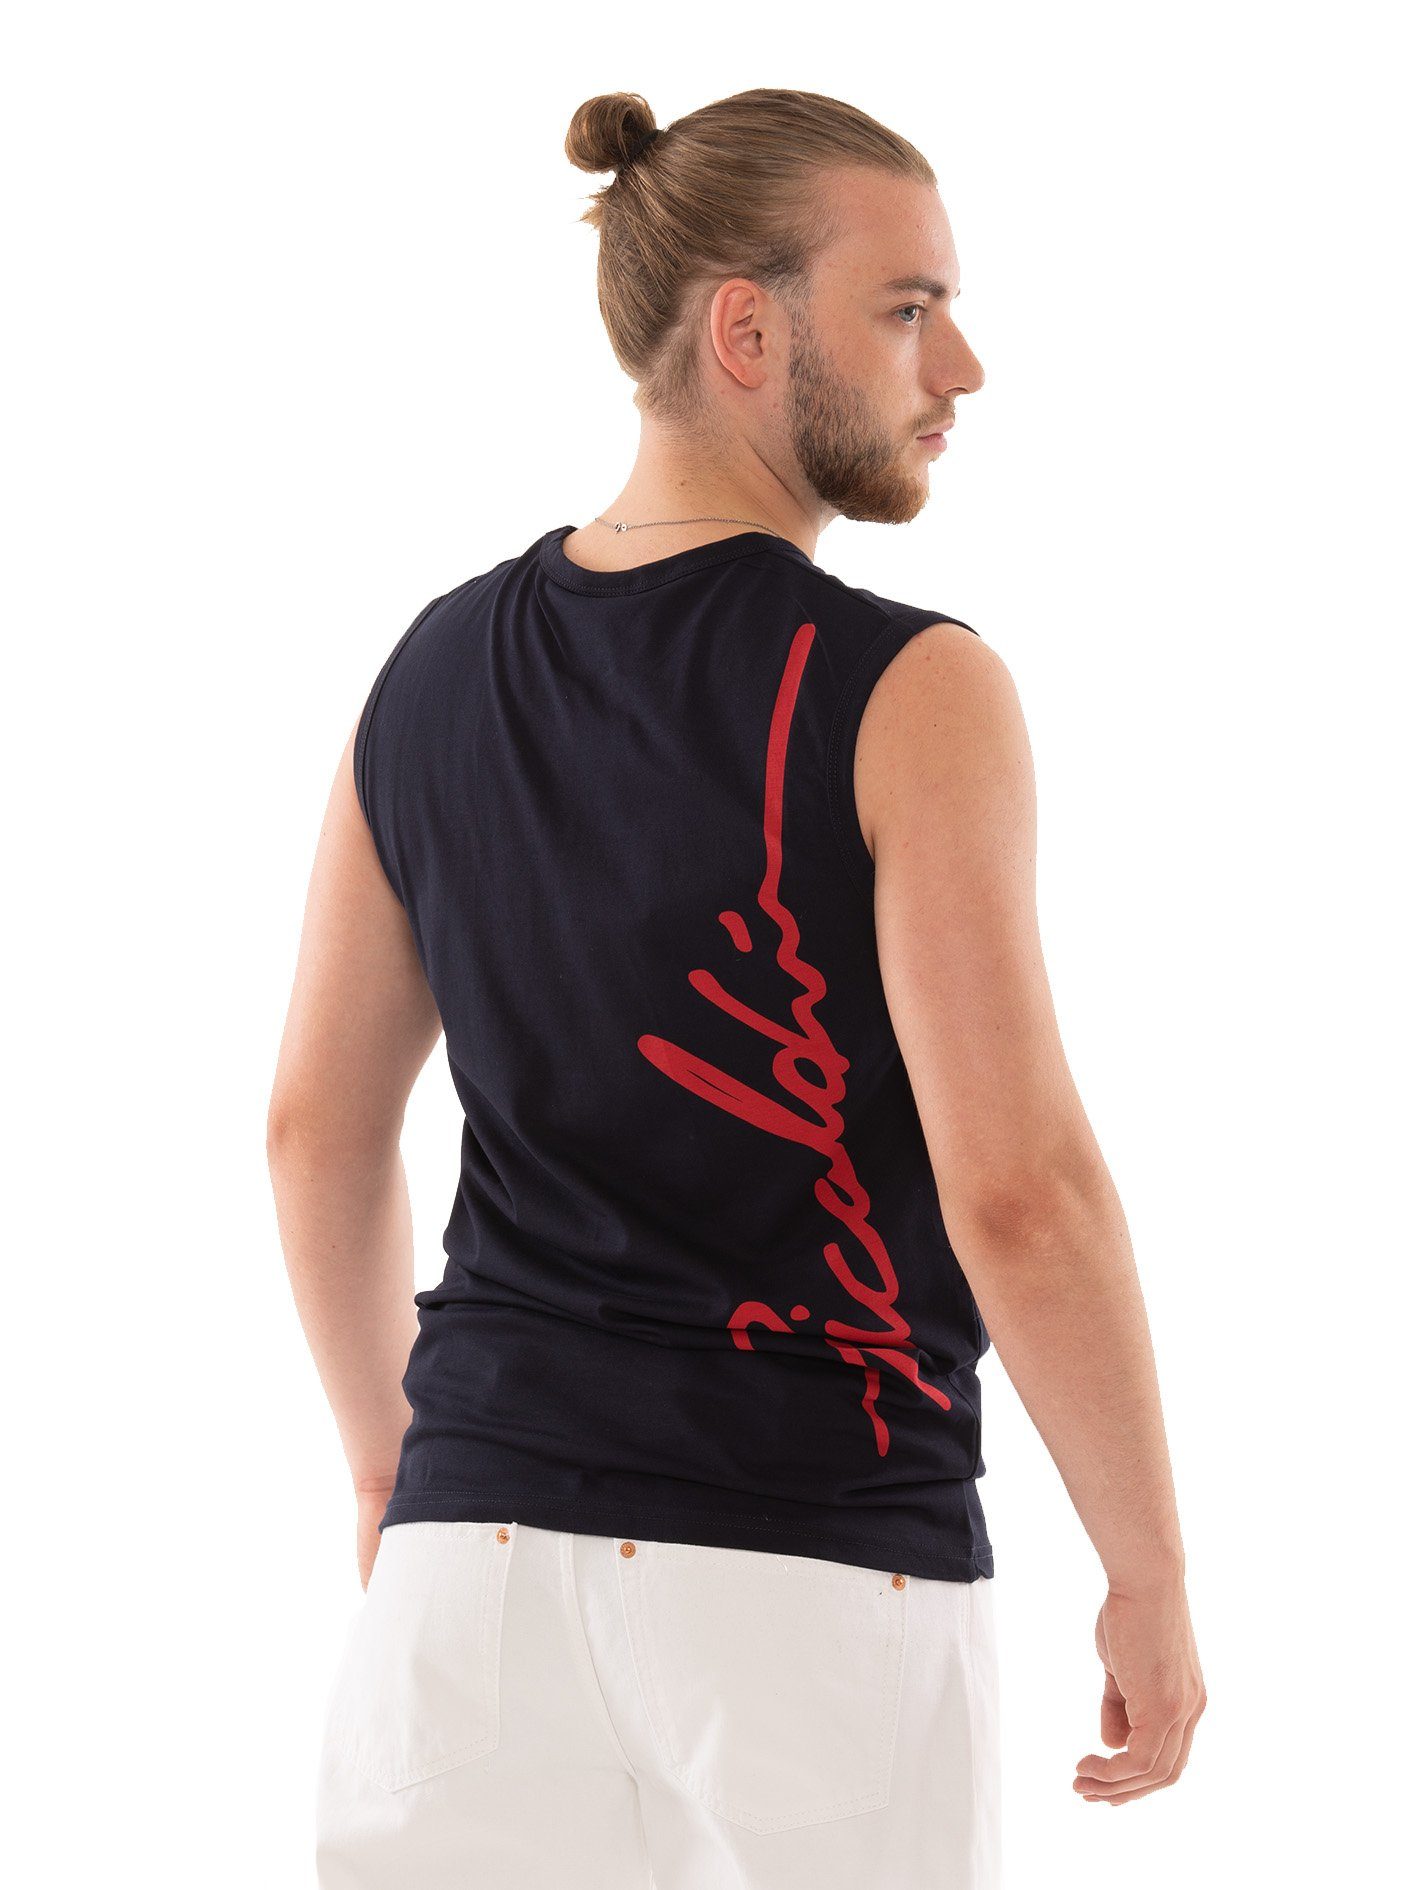 Top Muskelshirt Navy Jeans Blue Male Sommermode, Tank PICALDI Streetwear